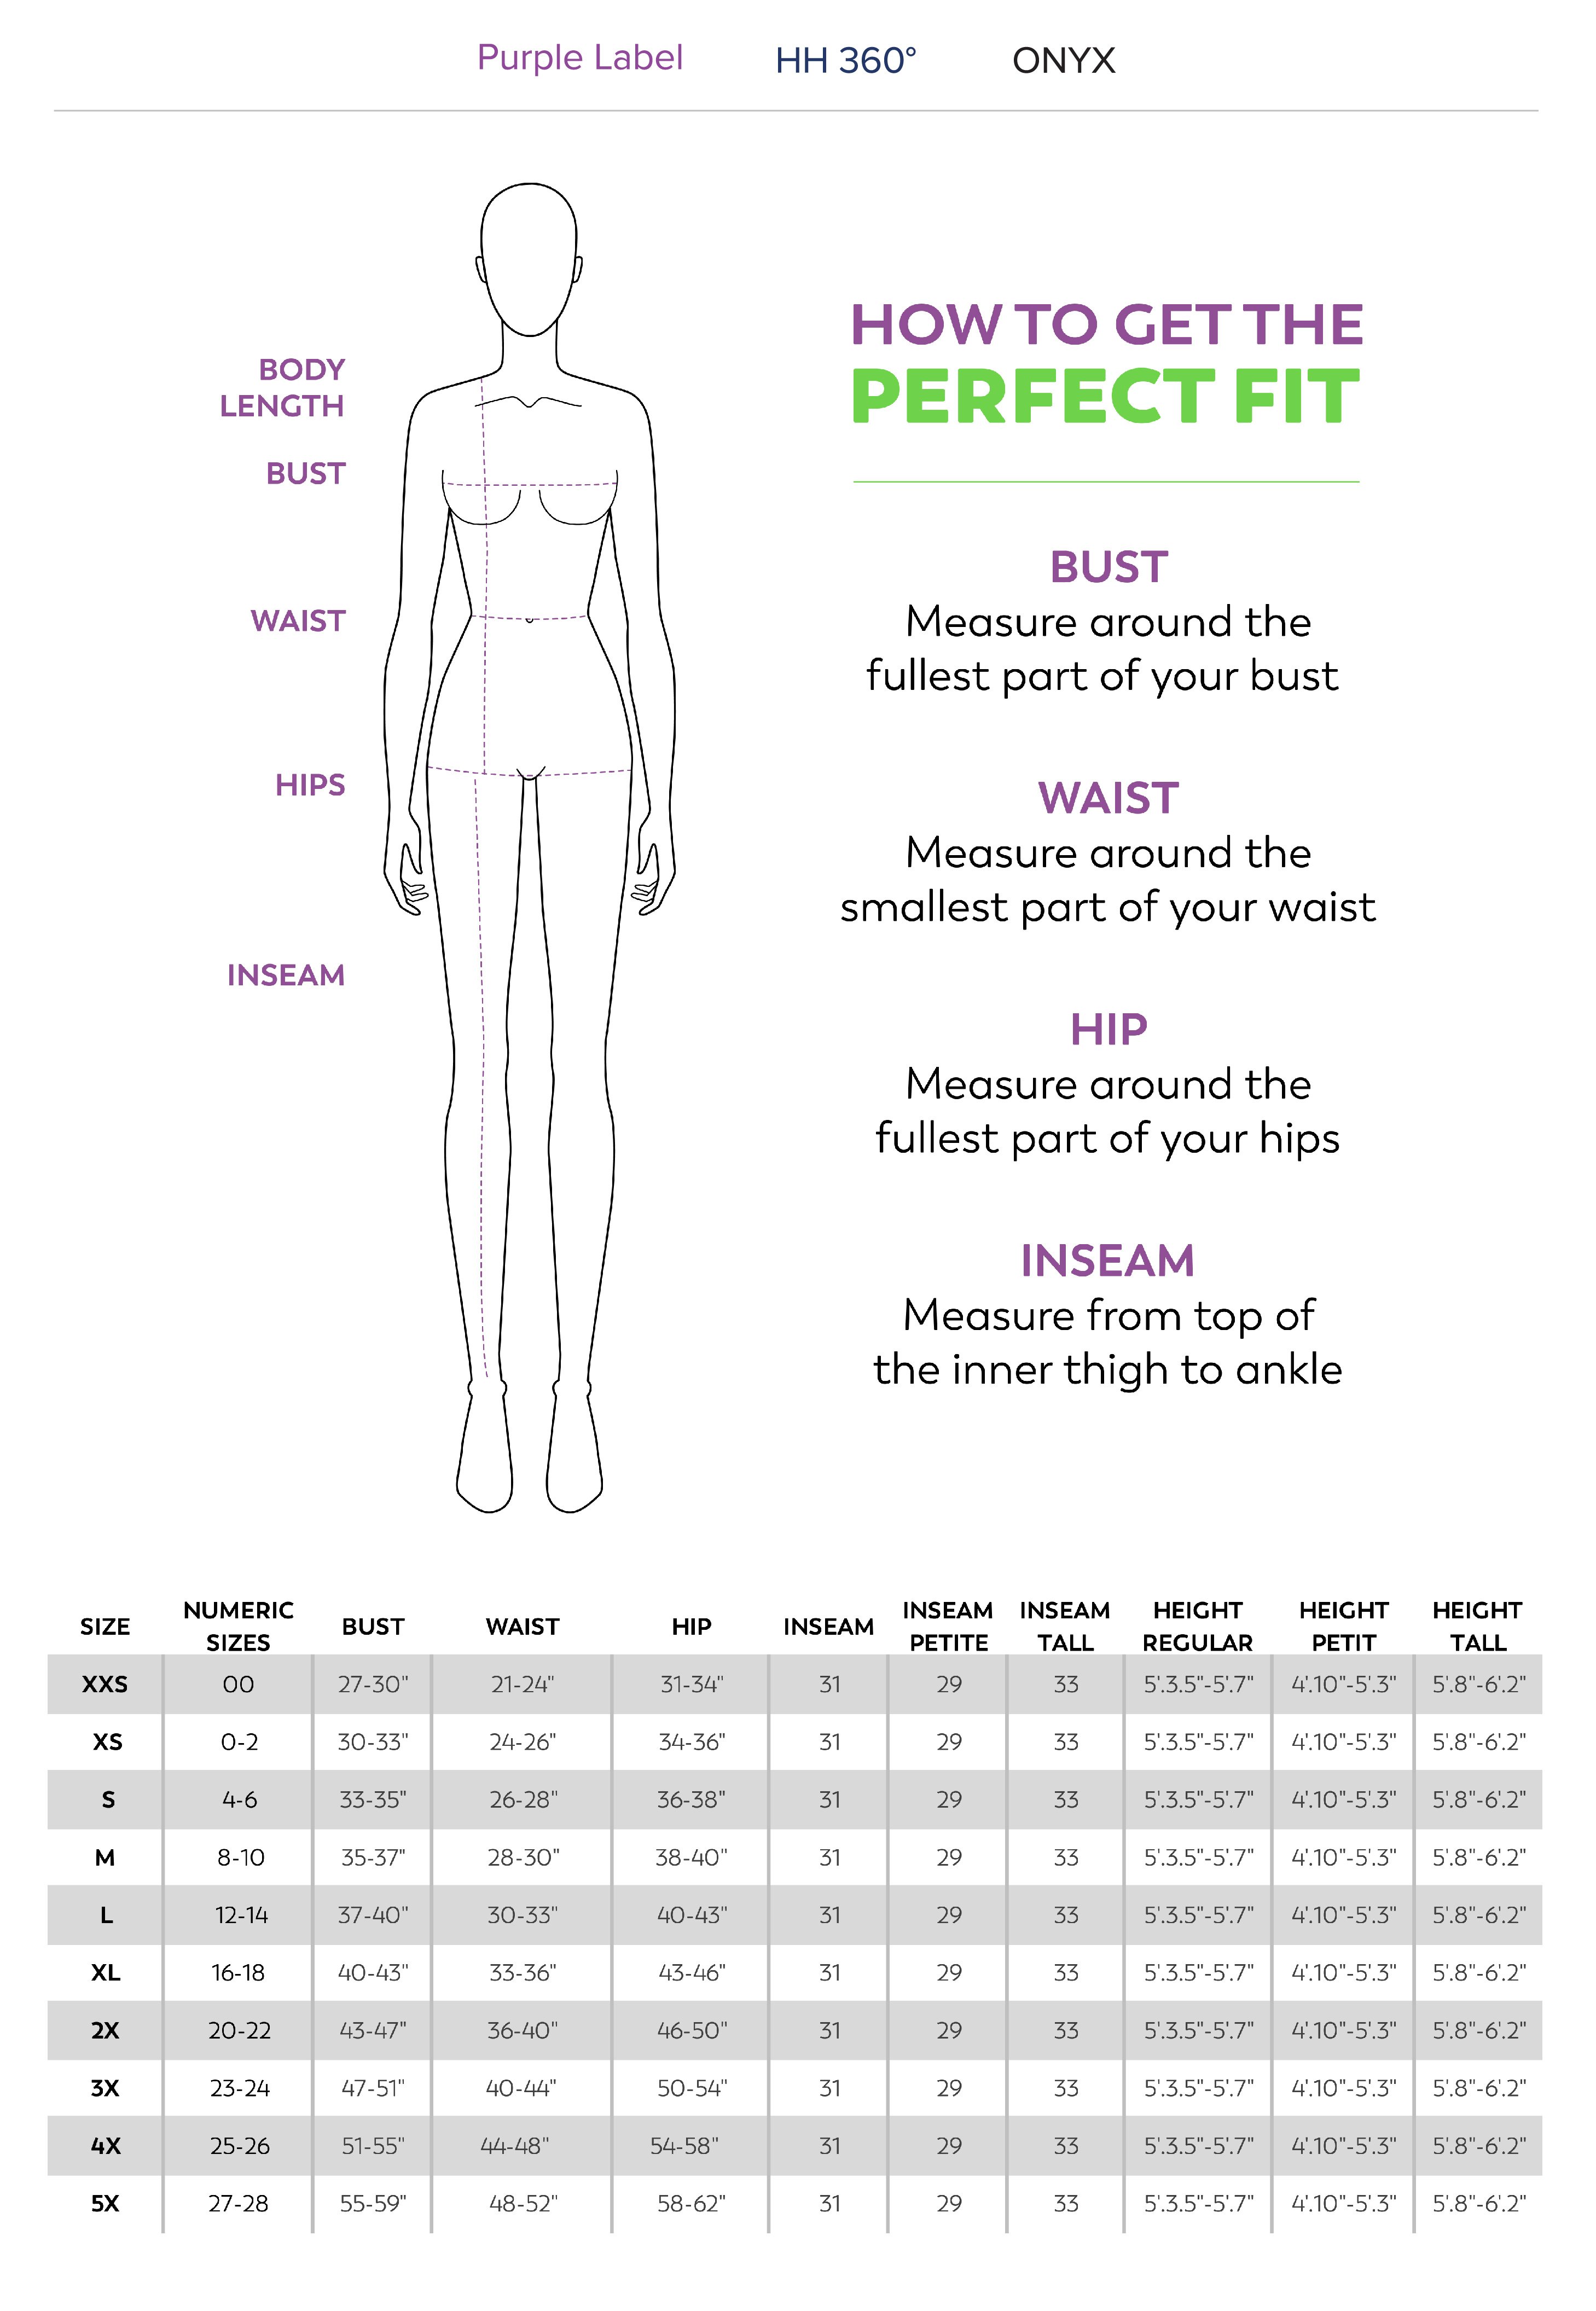 Women Size Chart for Purple Label, HH Works, HH360 & Onyx How to Measure